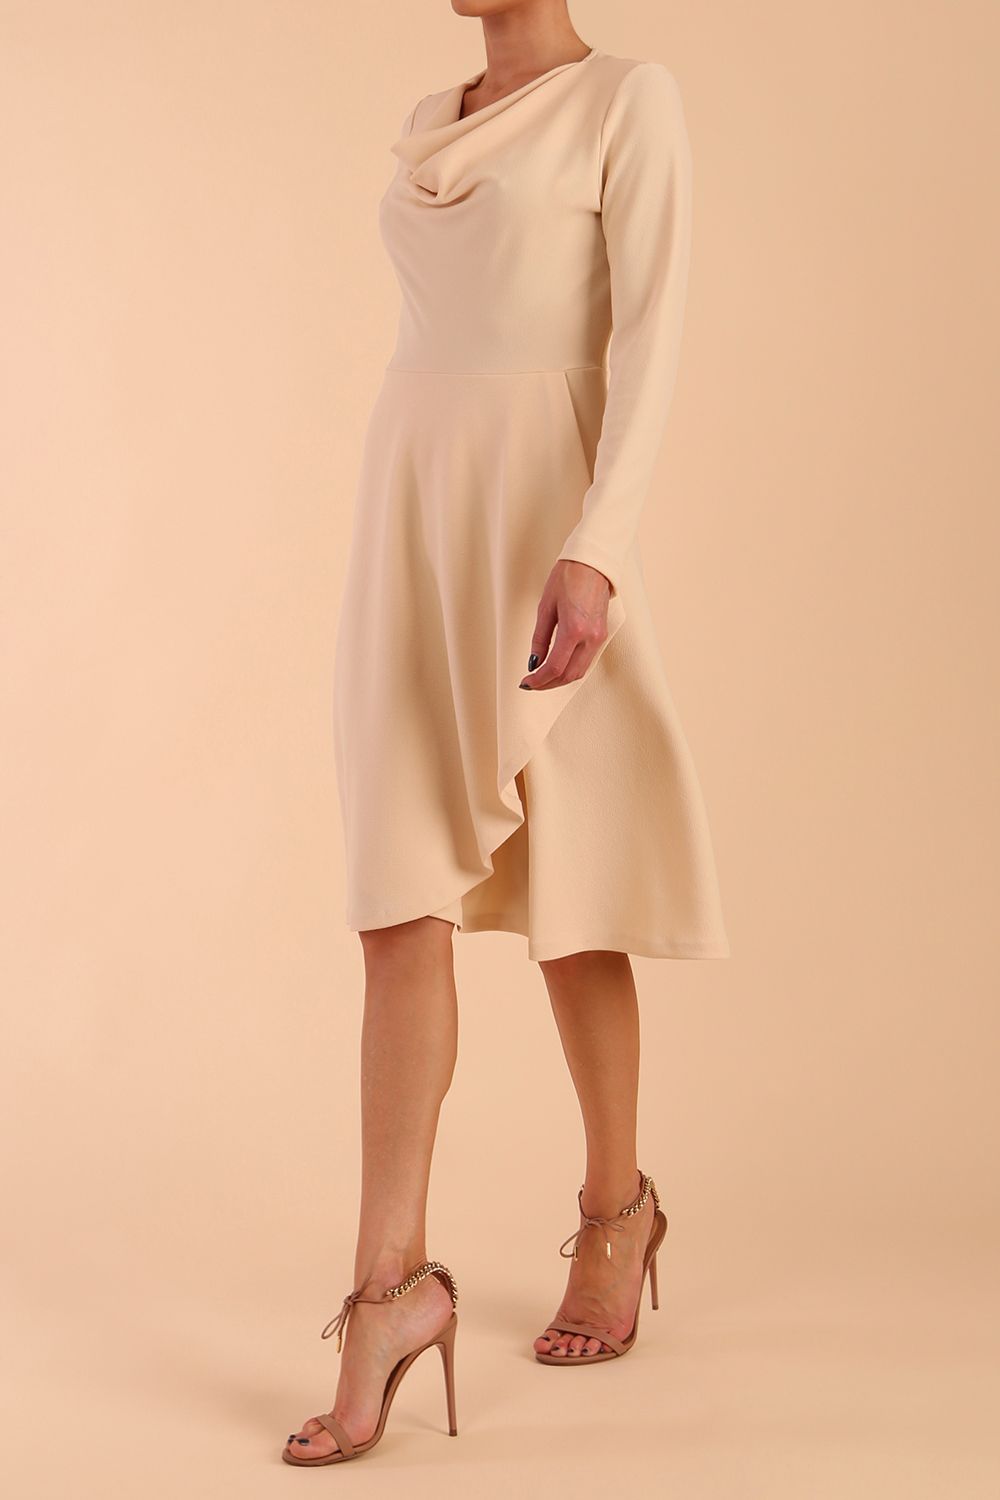 model is wearing diva catwalk moraig swing long sleeve dress with high cowl neckline and wrap skirt in beige front